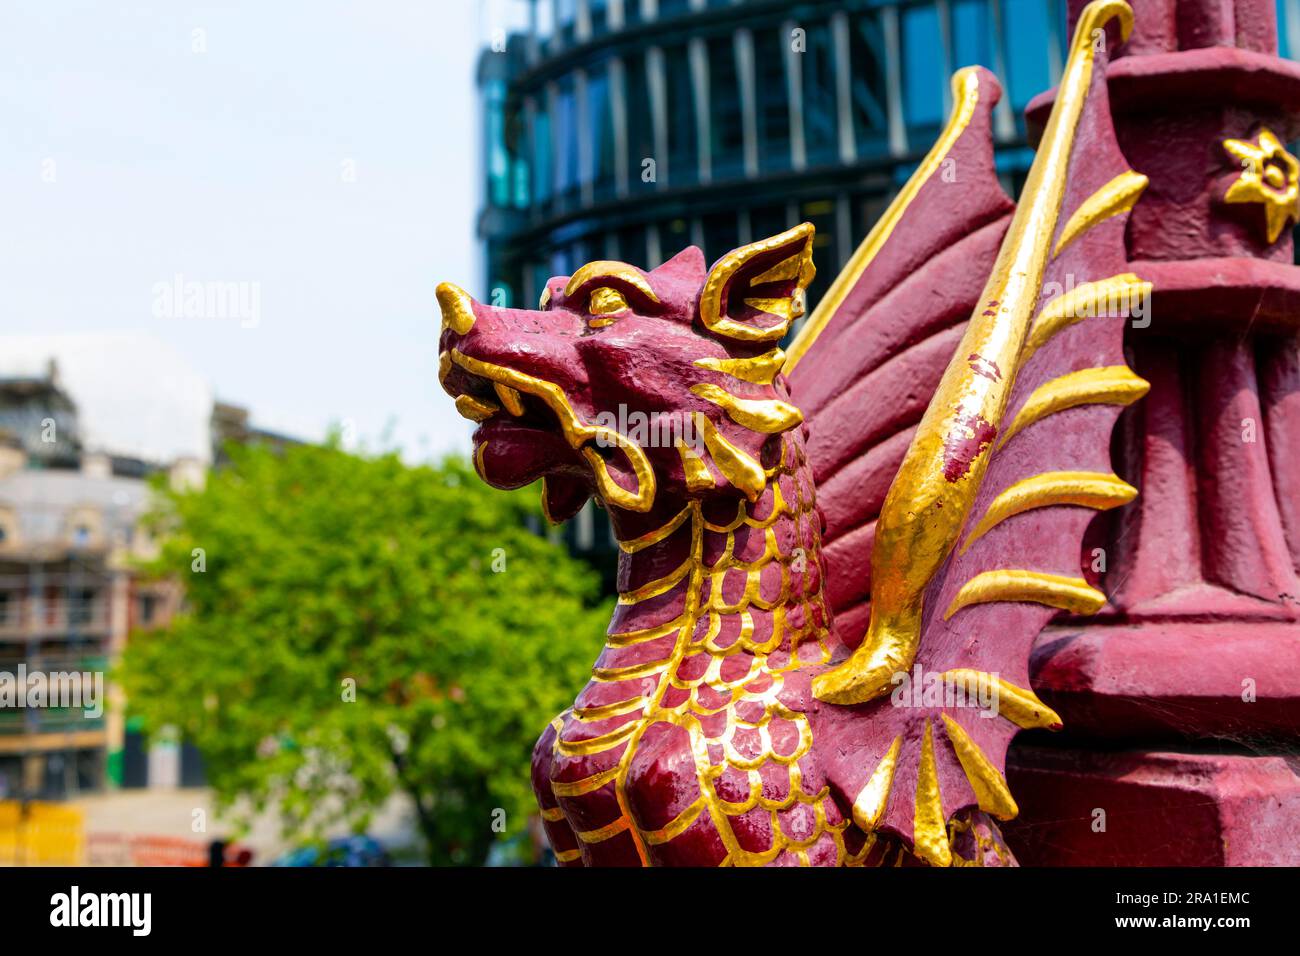 Red and gold dragon guarding a street lamp on the Holborn Viaduct, London, England, UK Stock Photo